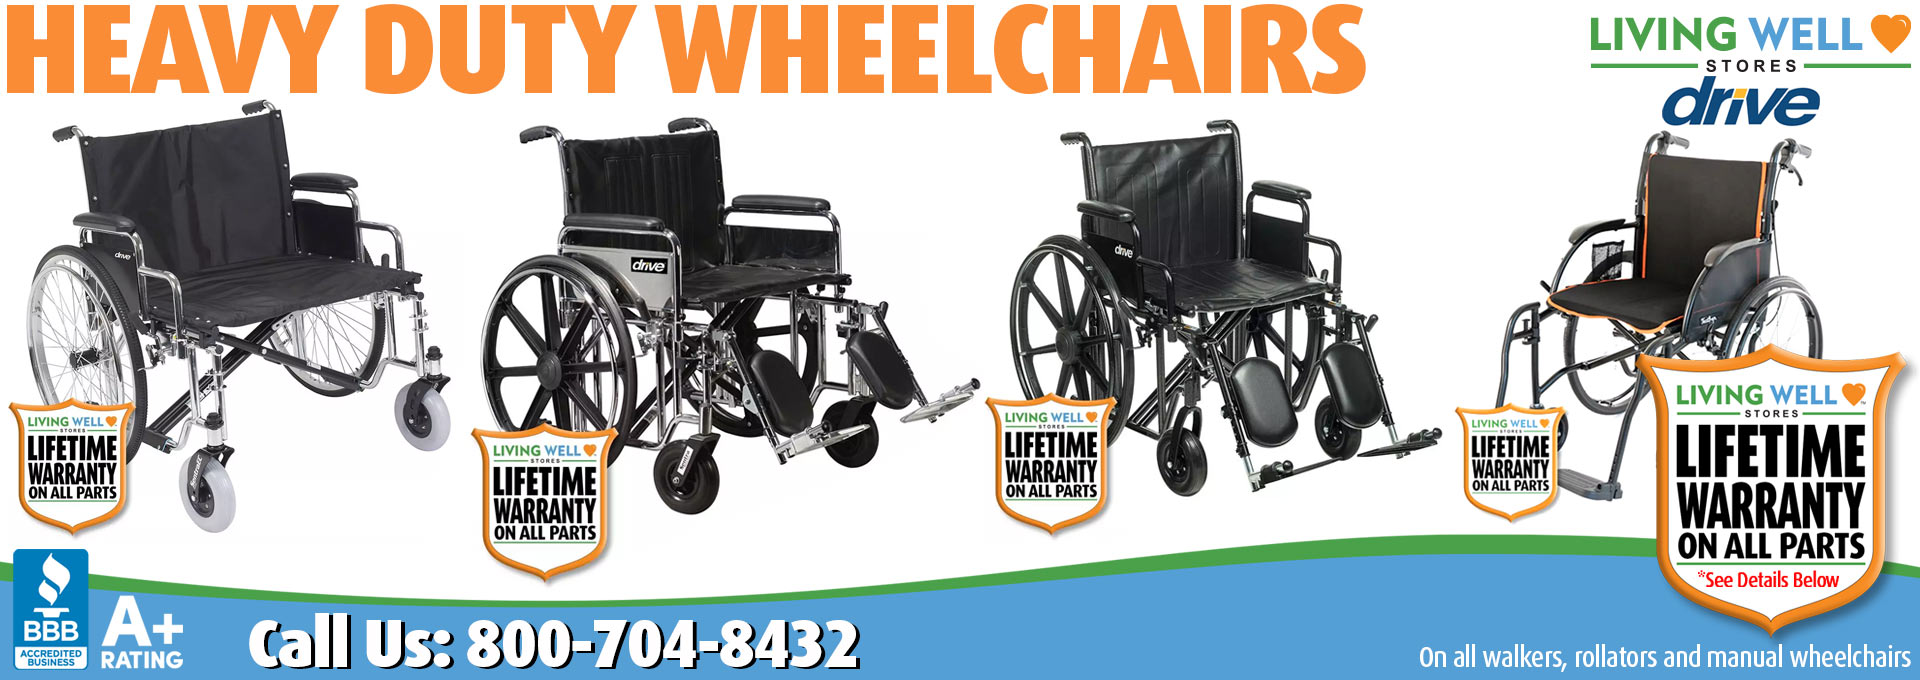 Living Well Stores: Featuring the best selection of Walking Assist and Manual Wheelchair Products for Sale